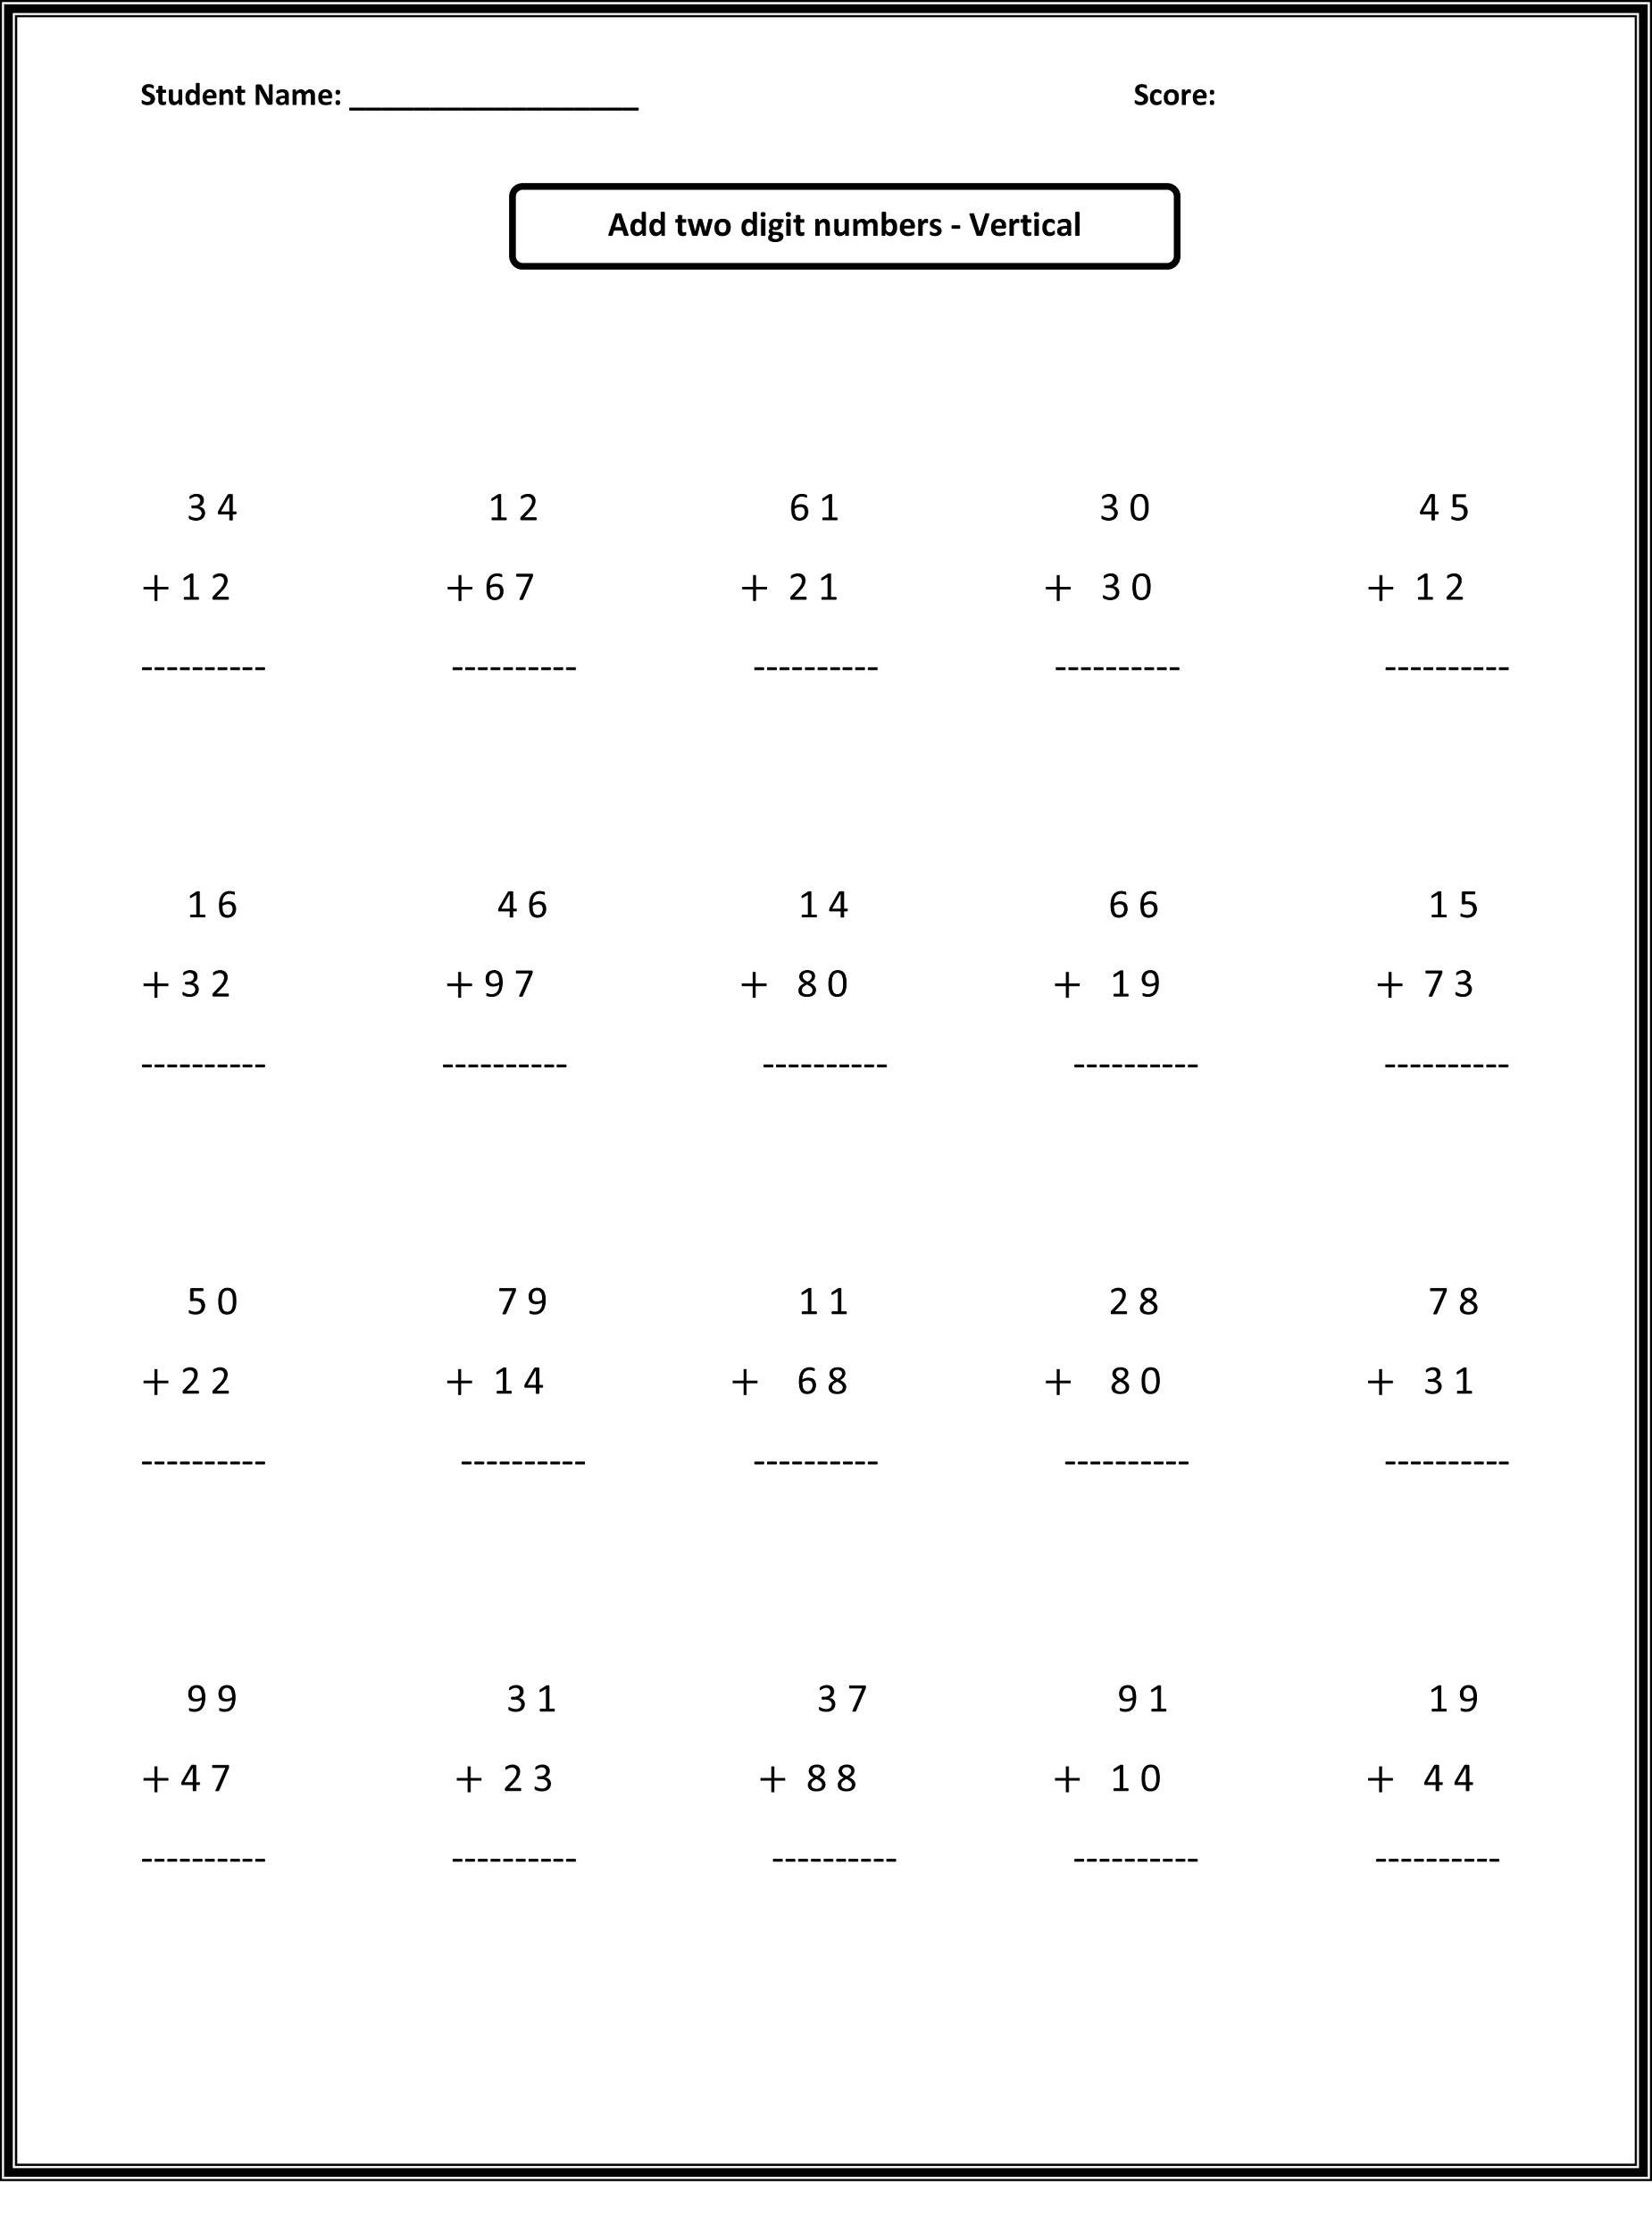 4-free-math-worksheets-second-grade-2-addition-add-in-columns-missing